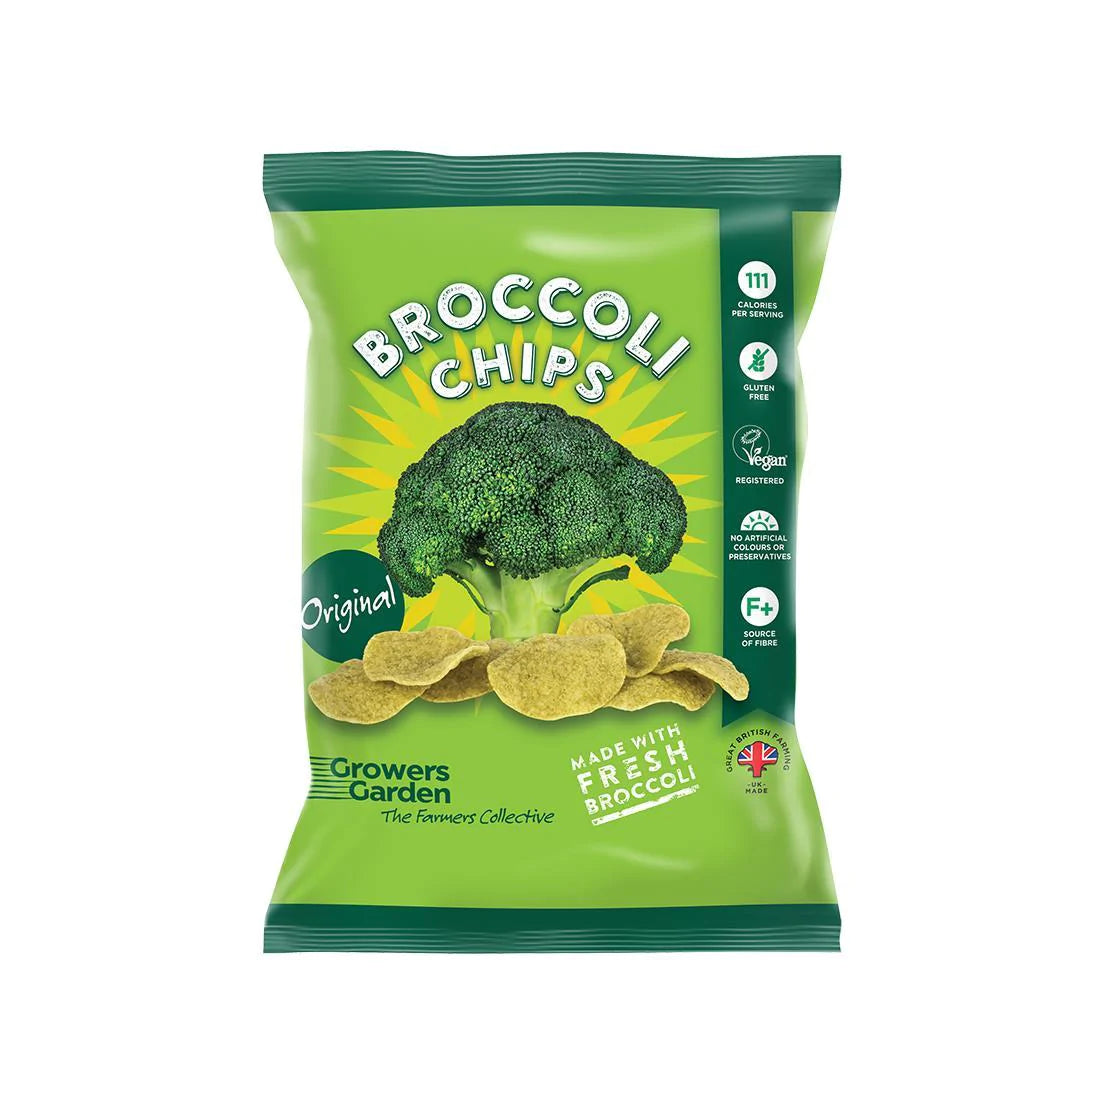 
                  
                    Growers Garden Broccoli Crisps - Original flavour. These broccoli crisps with no seasoning and are all about delicious natural broccoli flavour. Absolutely delicious!
                  
                